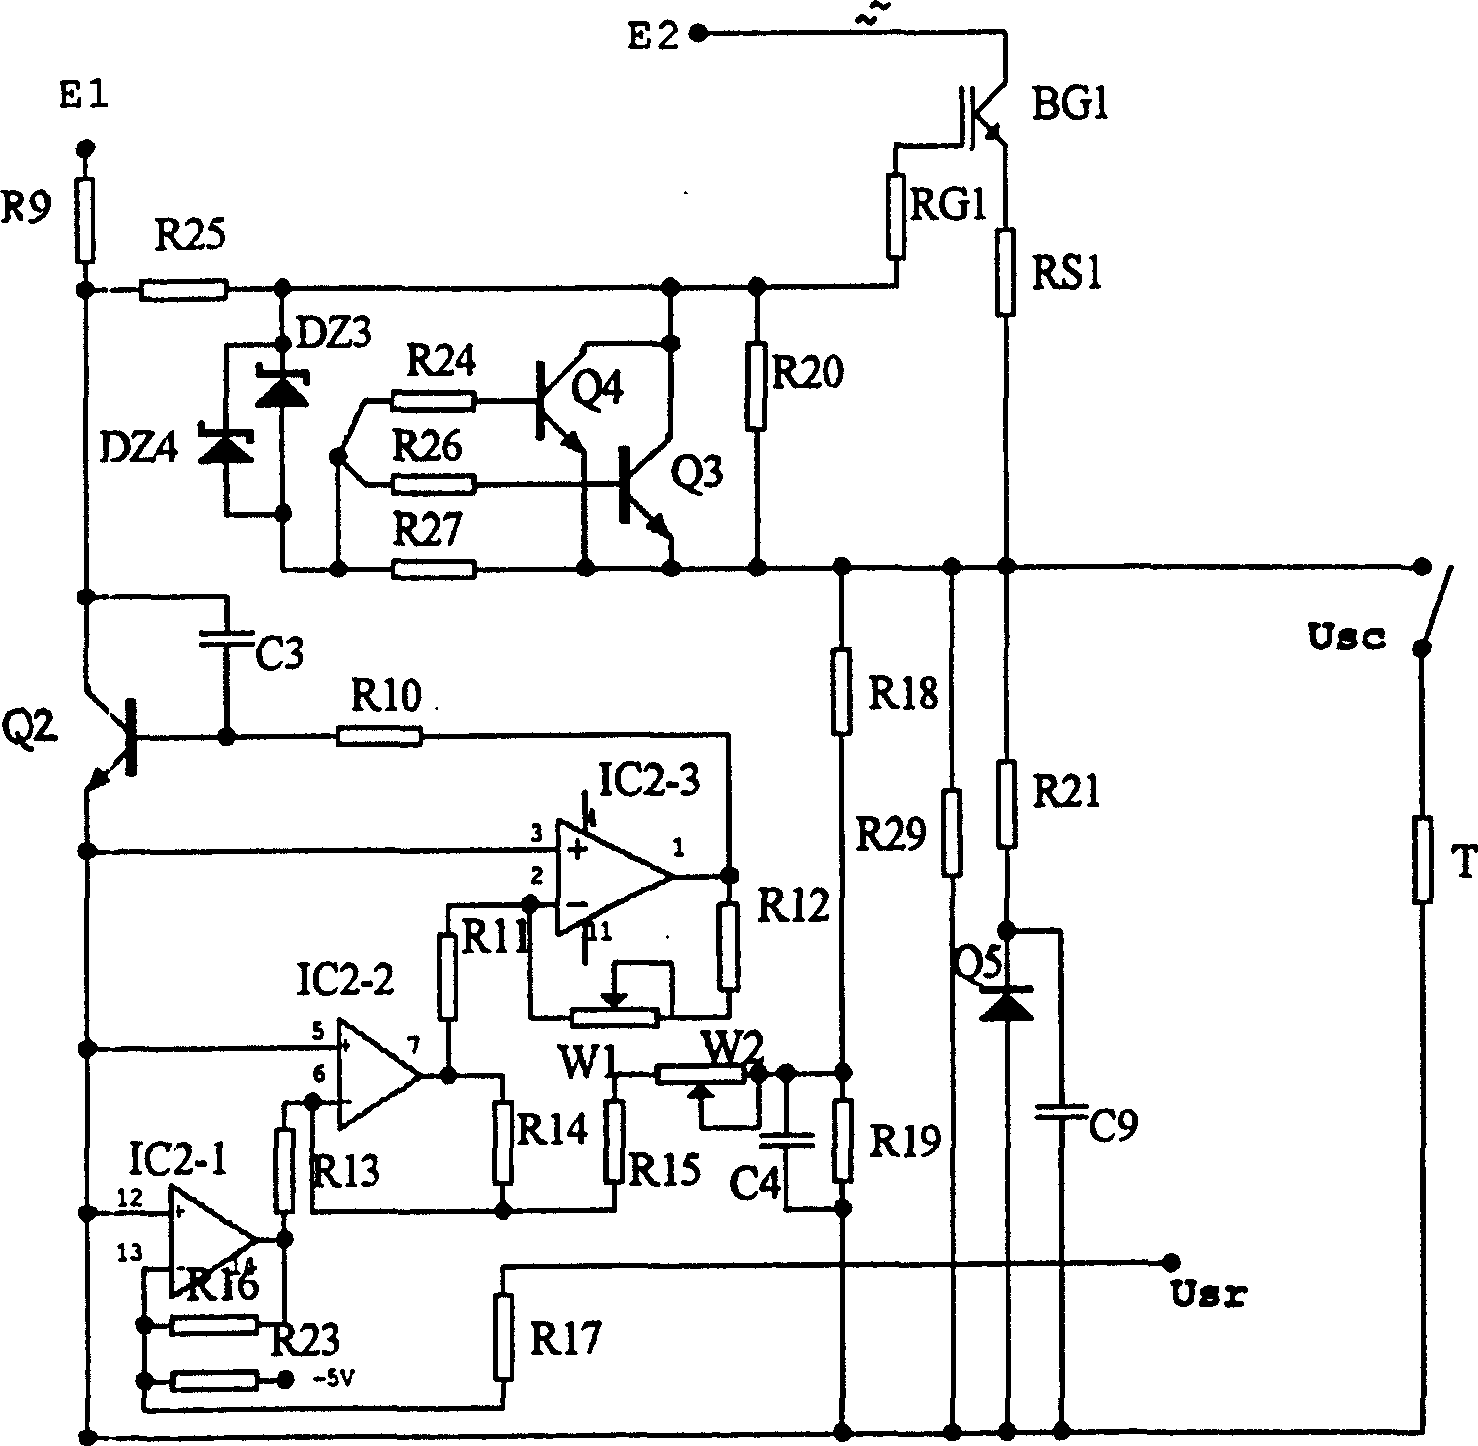 DC power amplifier for interference simulator of vehicle electronic apparatus